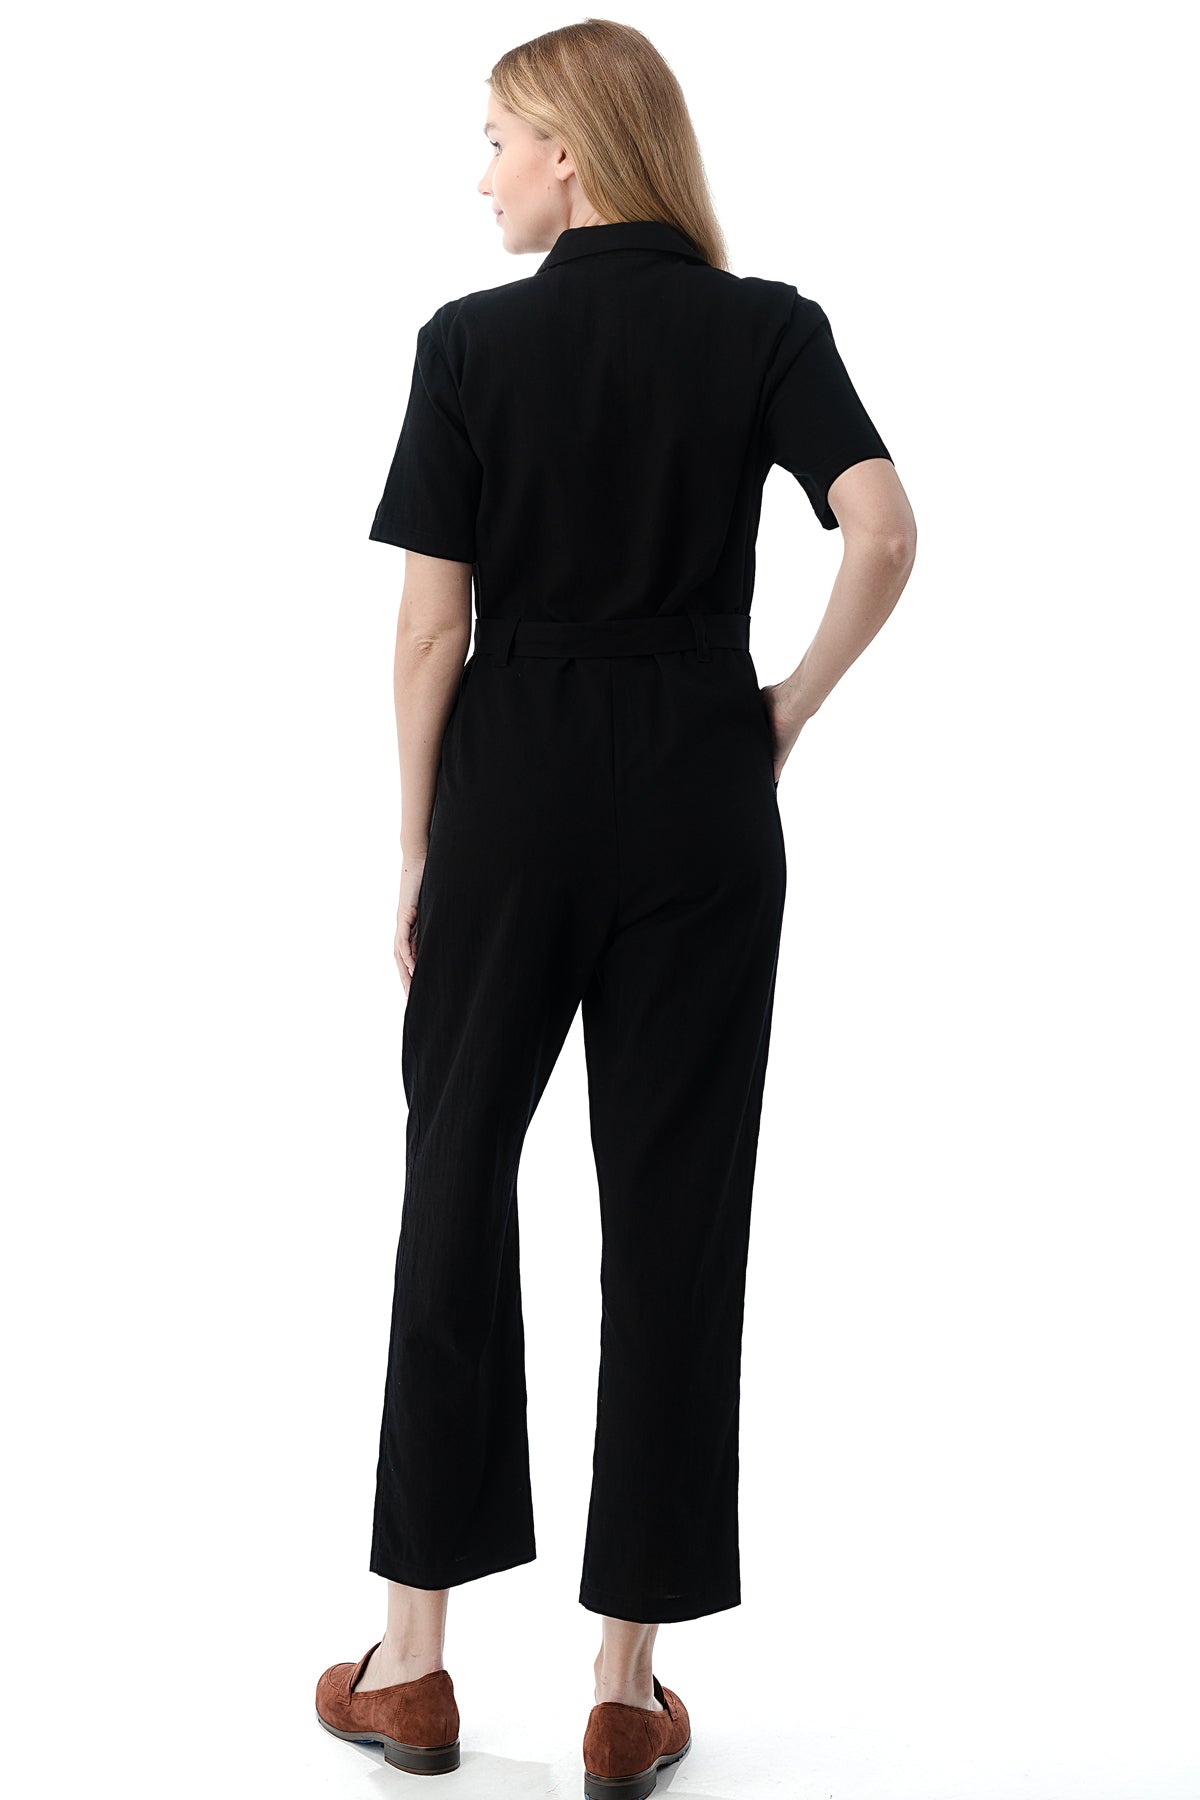 nsendm Women Short Sleeve Jumpsuit Women's Short Sleeve Collared Cropped  Coverall Button Down Tie Waist Overlay Suit Women Pants Black Small